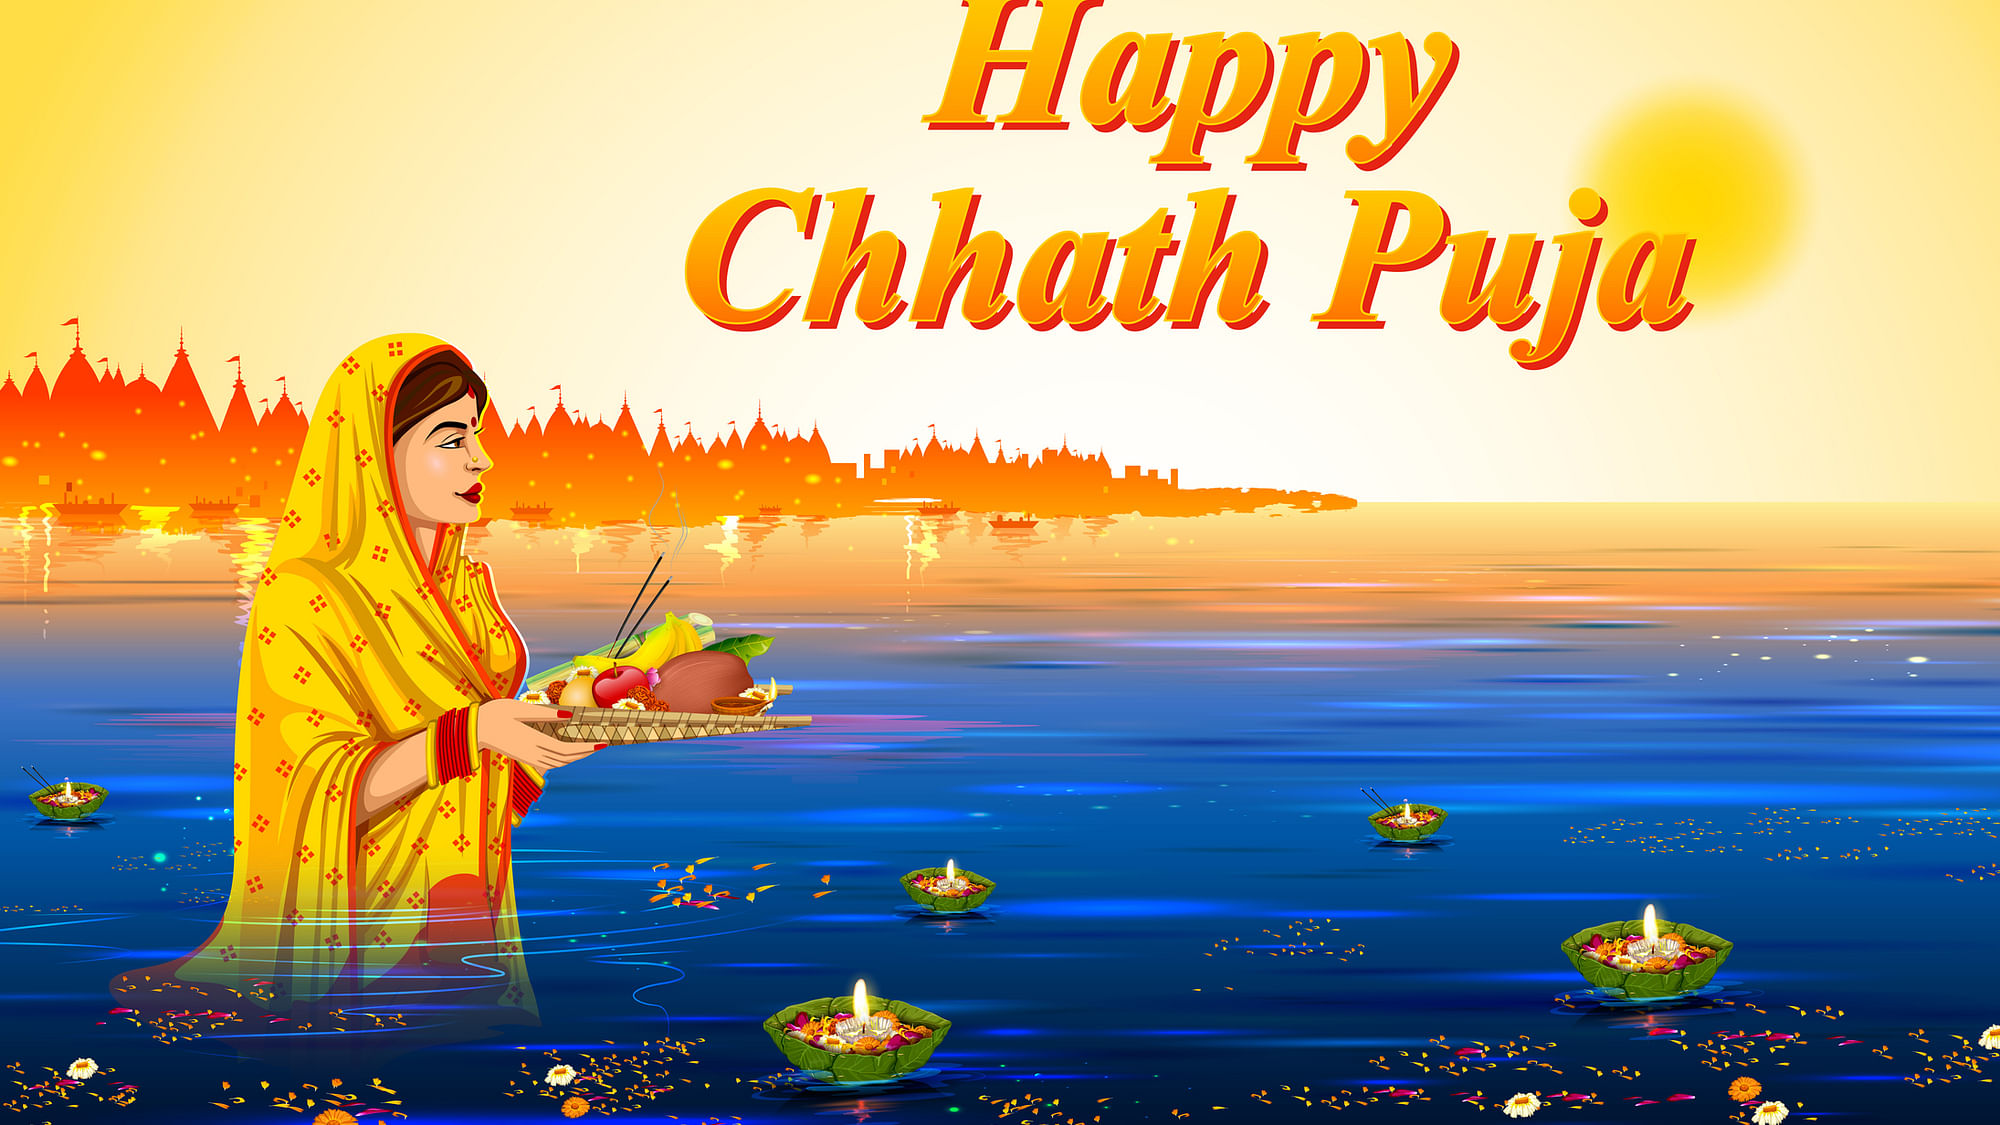 Happy Chhath Puja 2019 Wishes and Quotes